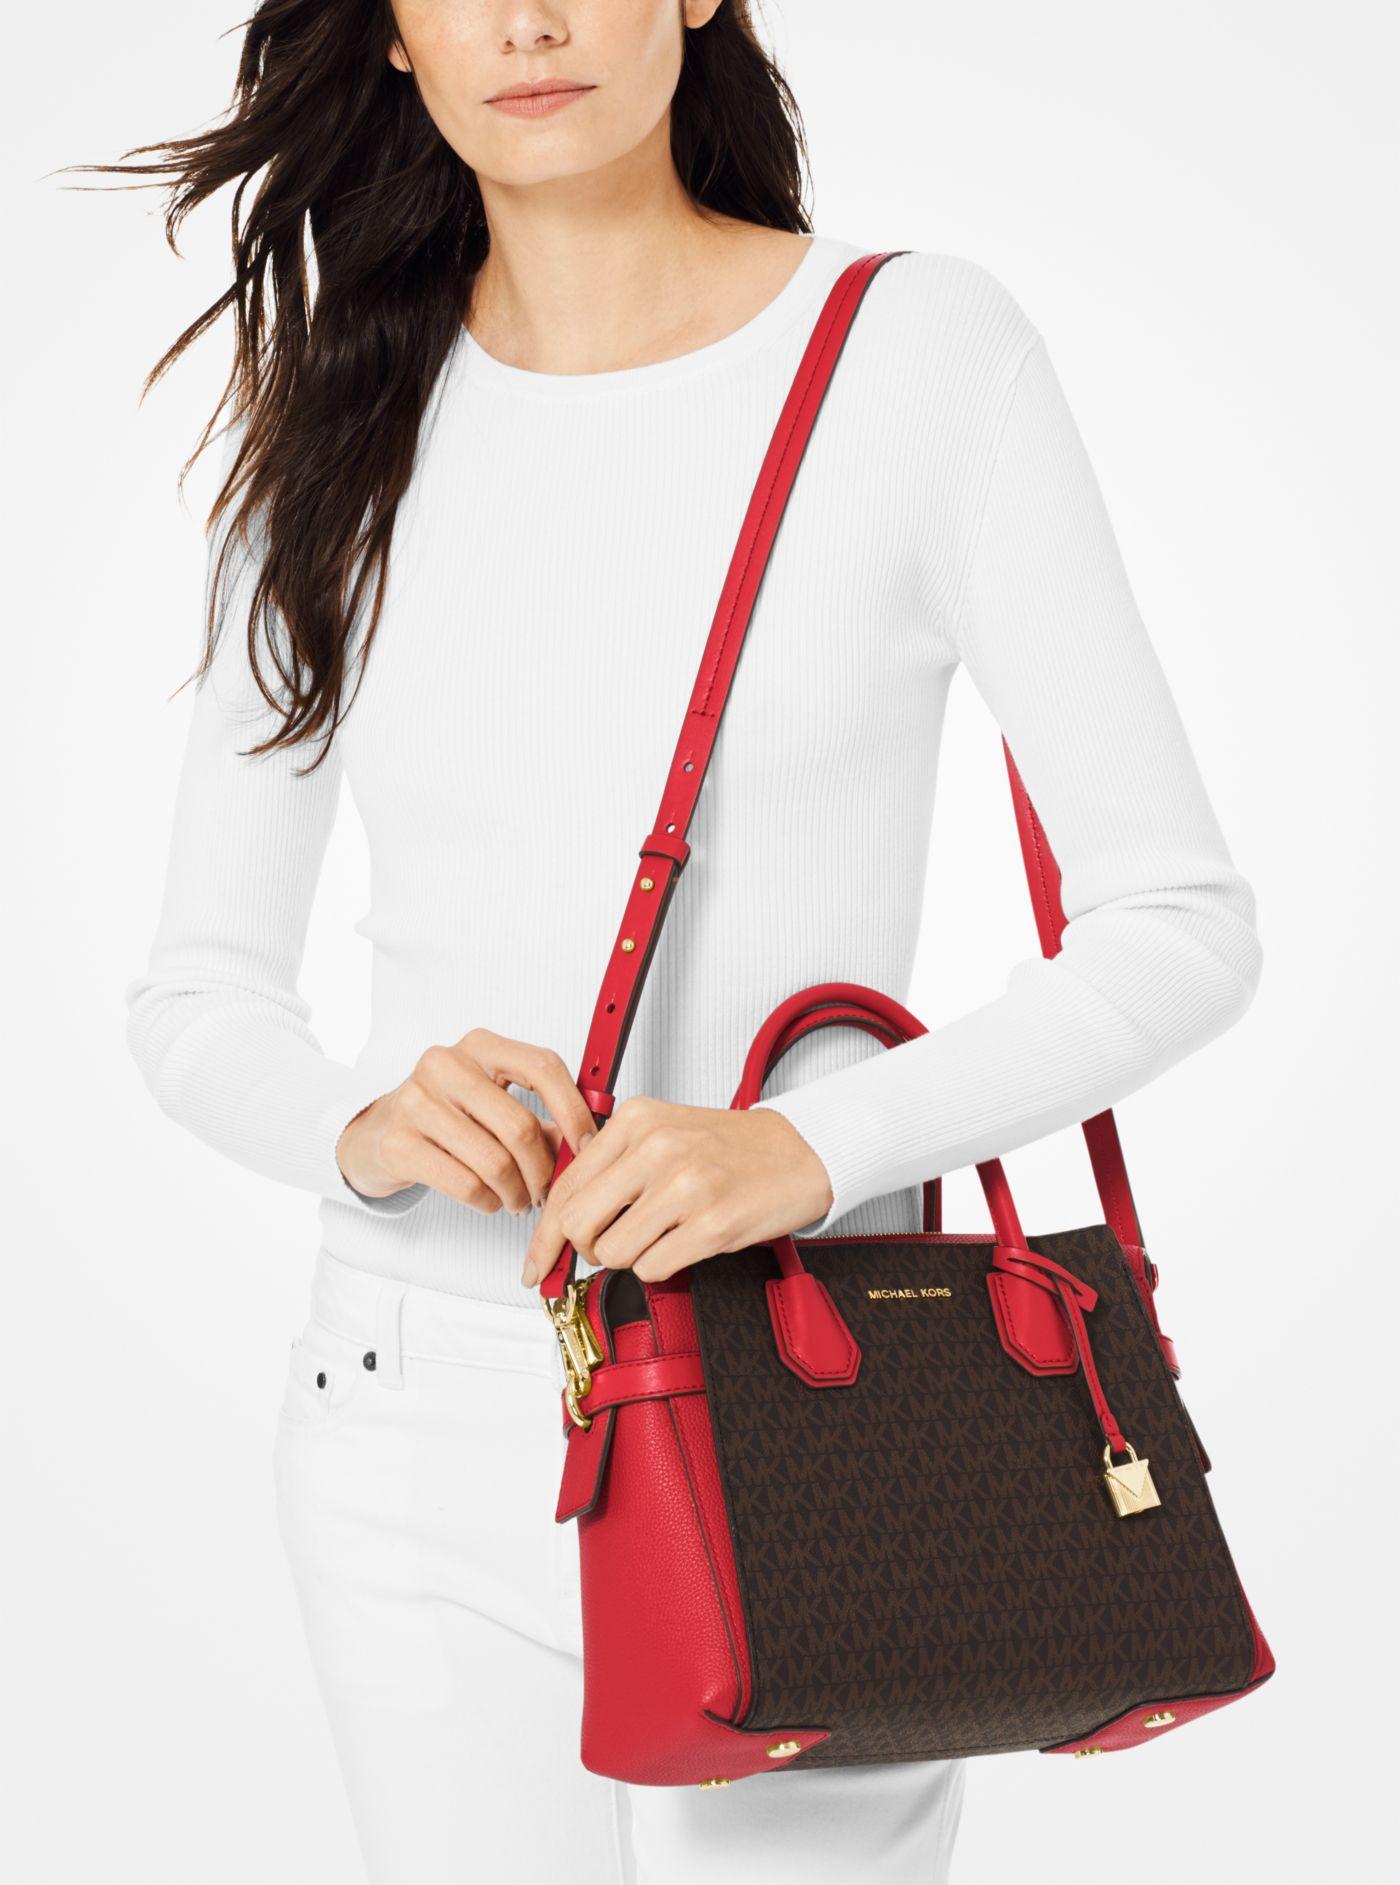 Total 56+ imagen michael kors brown and red bag - Abzlocal.mx